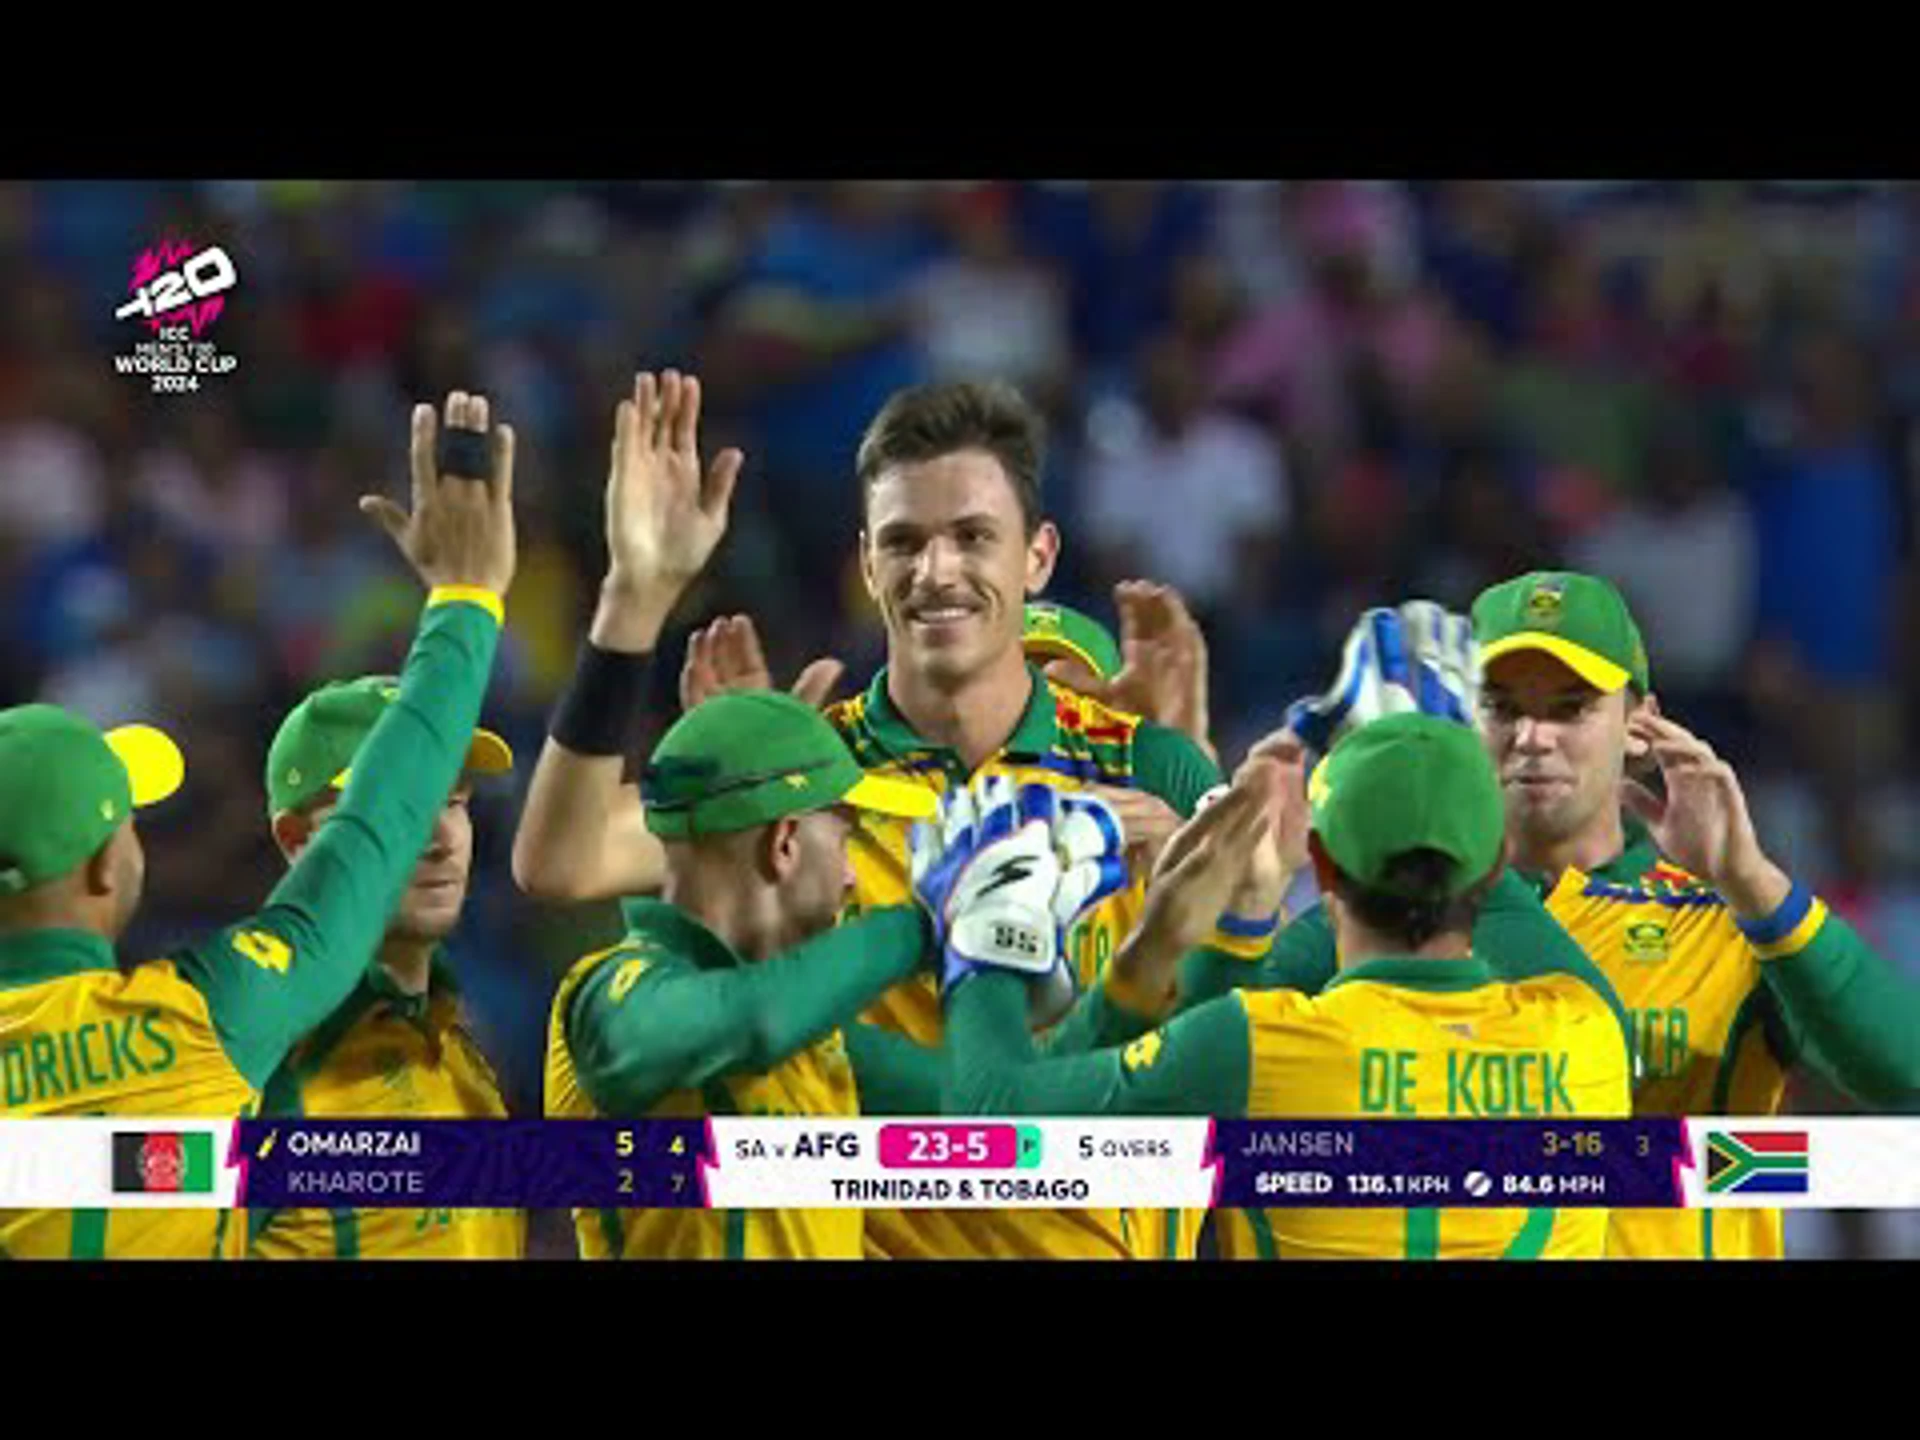 Marco Jansen | South Africa v Afghanistan | ICC T20 World Cup Semi Finals